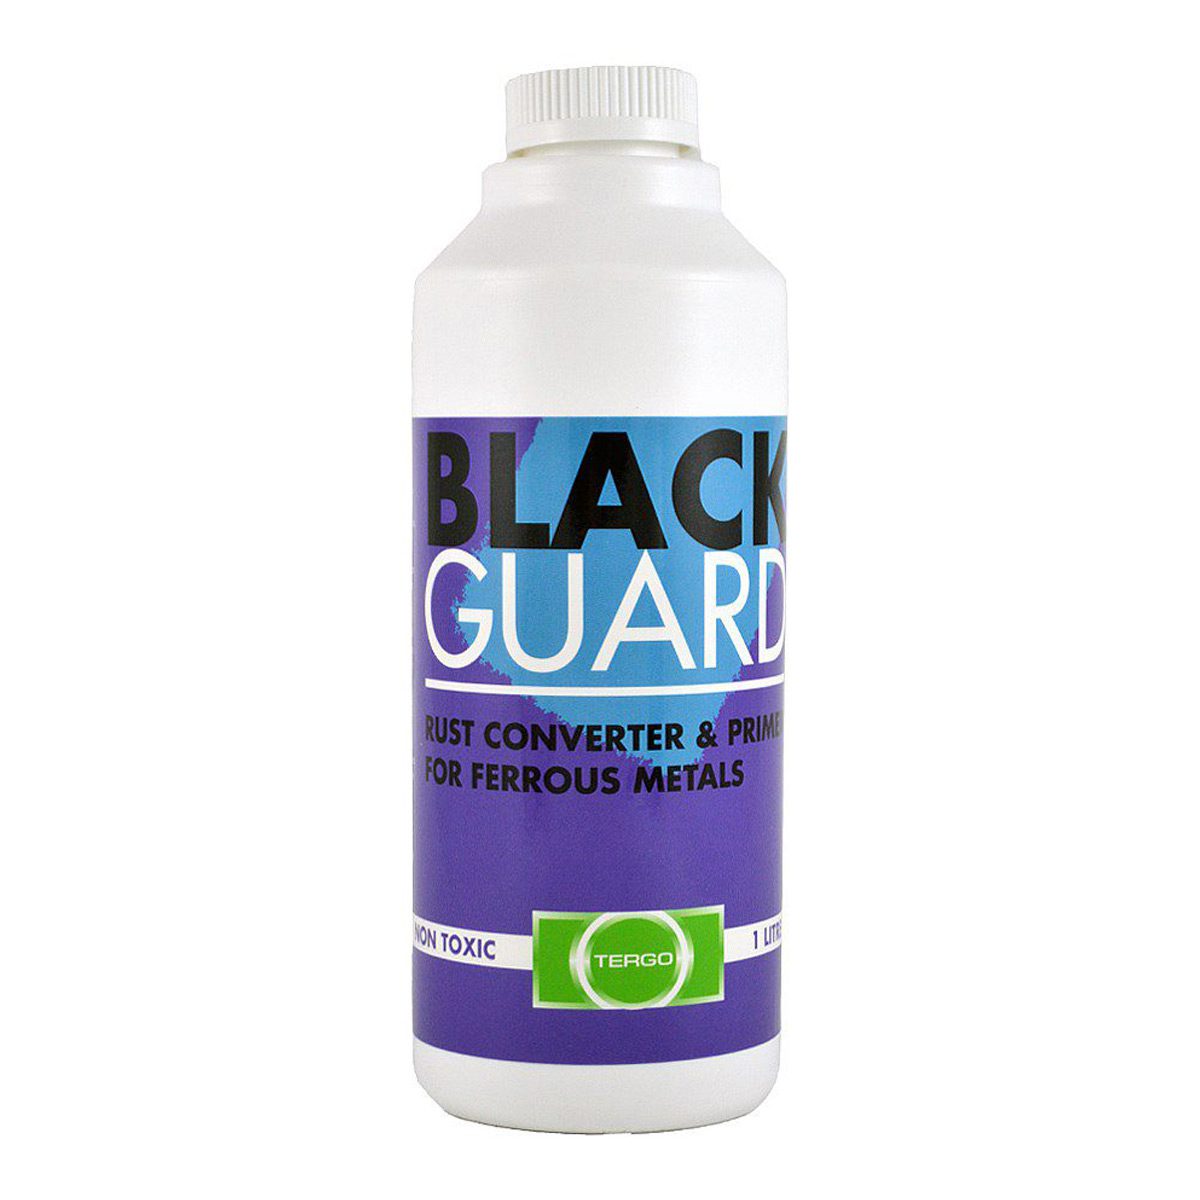 cleaning-products-industrial-specialist-blackguard-rust-converter-1L-litre-liquid-rust-converter-primer-converts-passivates-rust-on-surface-to-black-film-resists-further-corrosion-vjs-distributors-10981